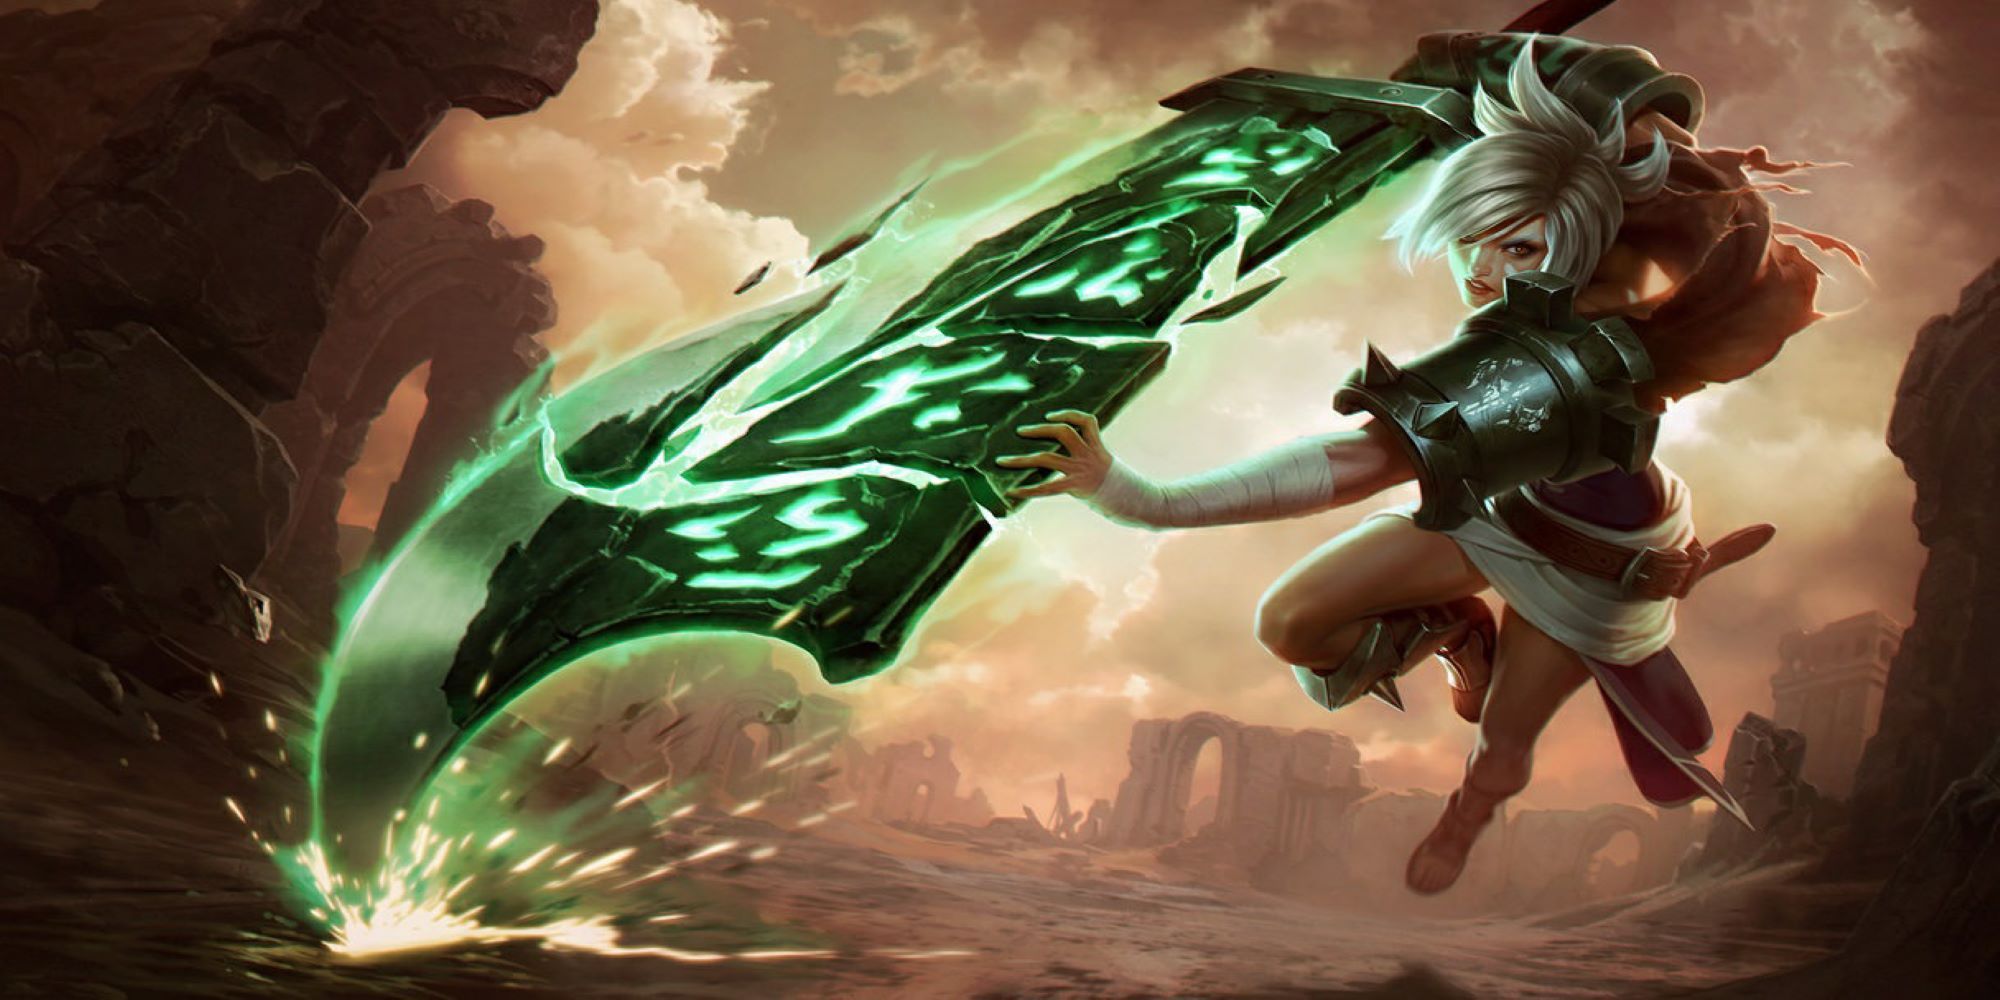 Torn from League of Legends runic blade